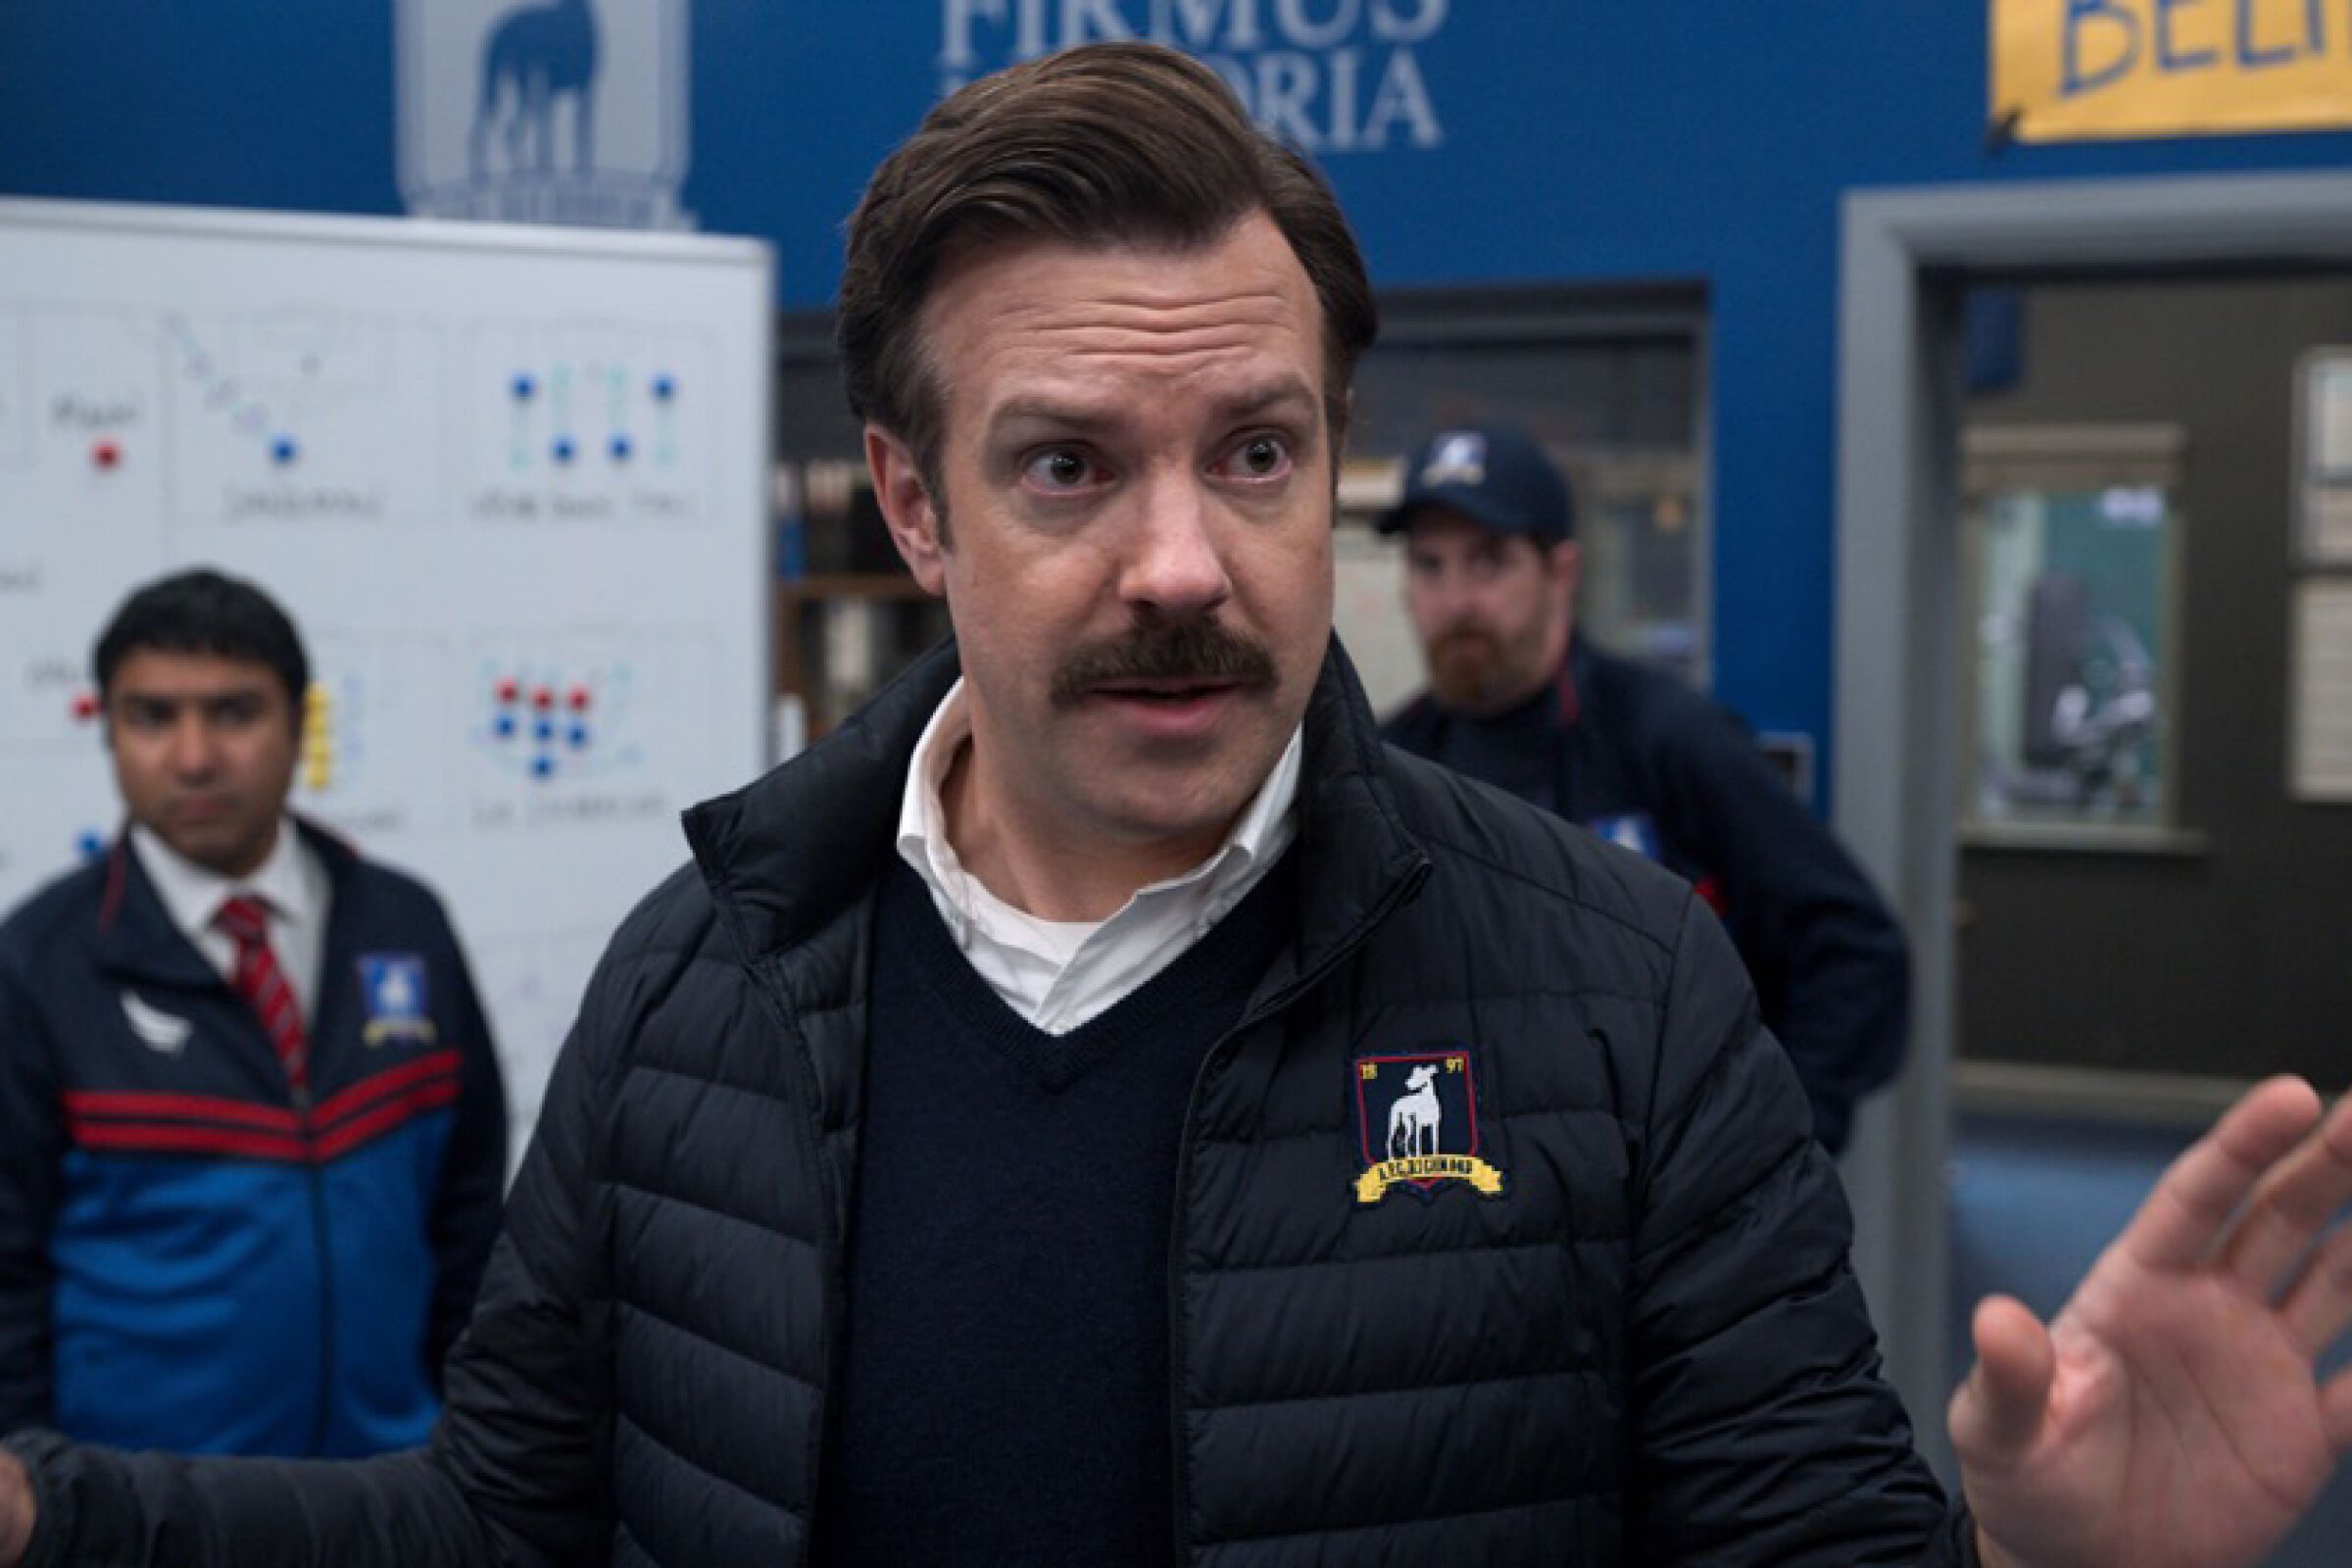 Jason Sudeikis in "Ted Lasso," a feel-good sports comedy we recommend for lowering your election day blood pressure.